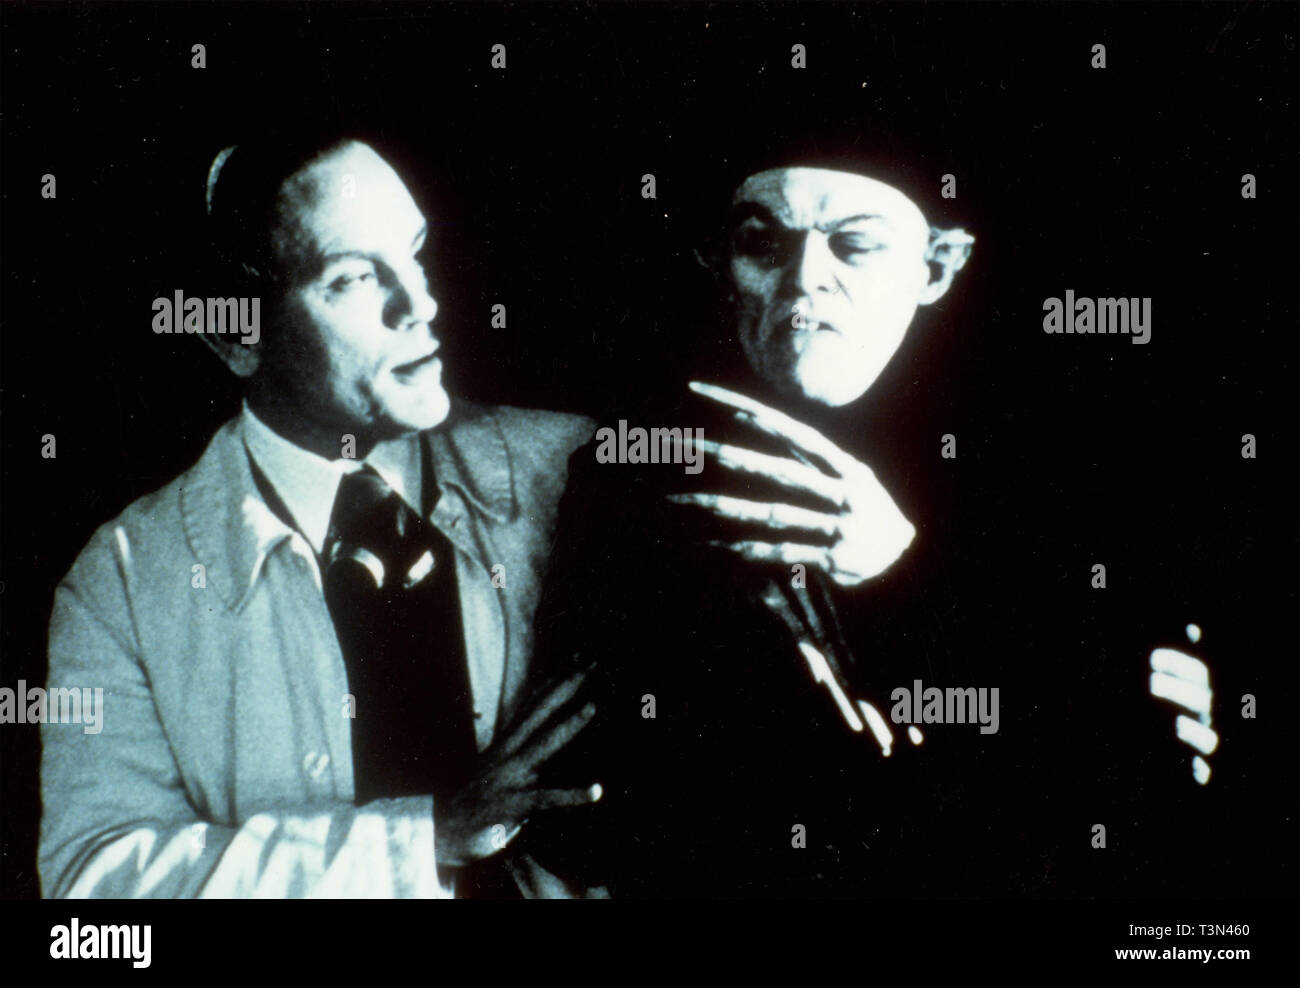 Actors John Malkovich and Willem Dafoe in the movie Shadow of the Vampire, 2000 Stock Photo